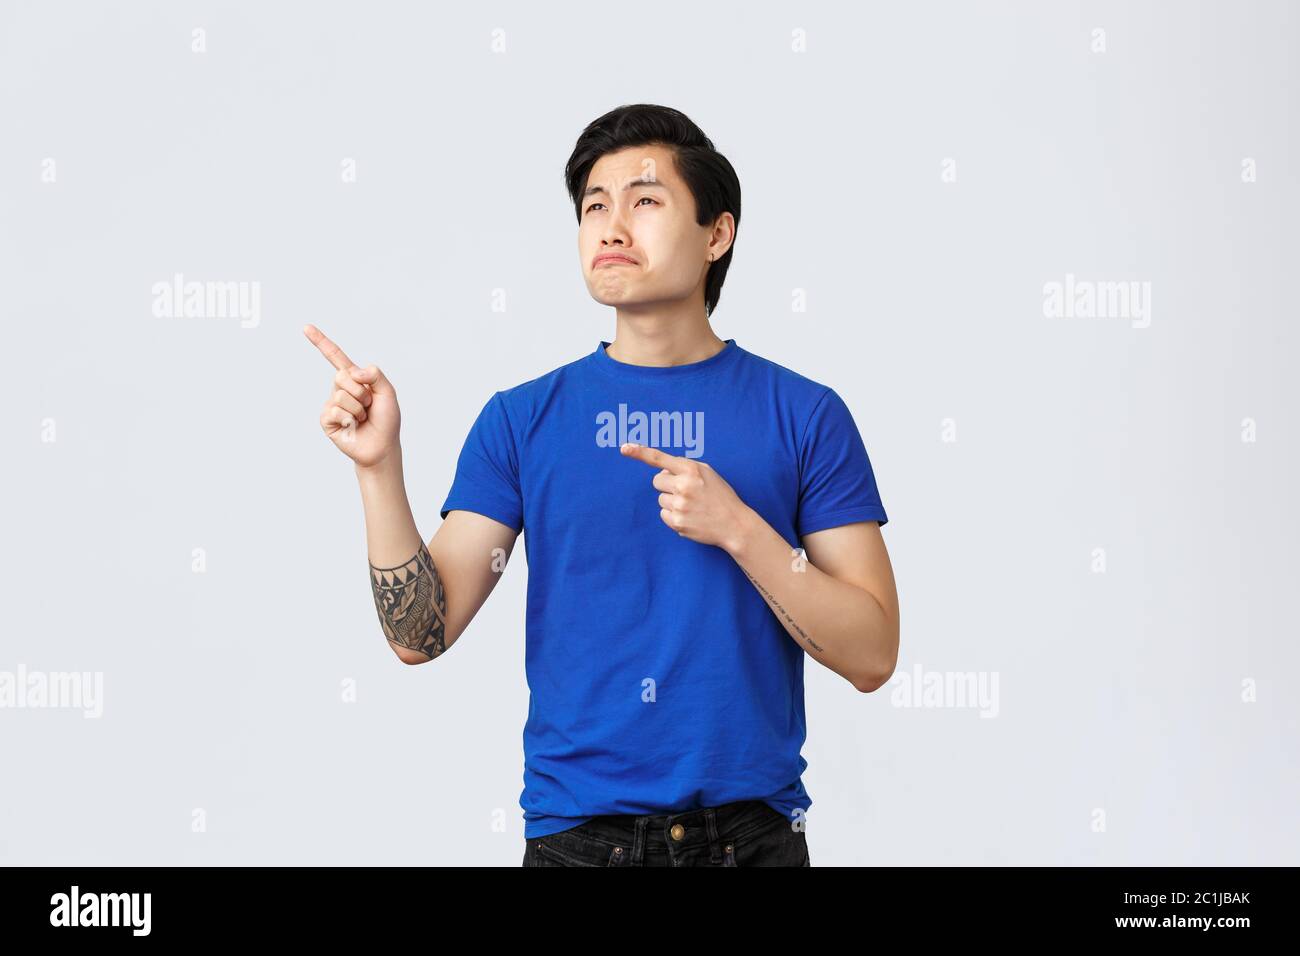 Disappointed and upset cute asian guy, man in blue t-shirt sobbing and looking at promo with jealousy or regret, grimacing pouting, whining at banner Stock Photo